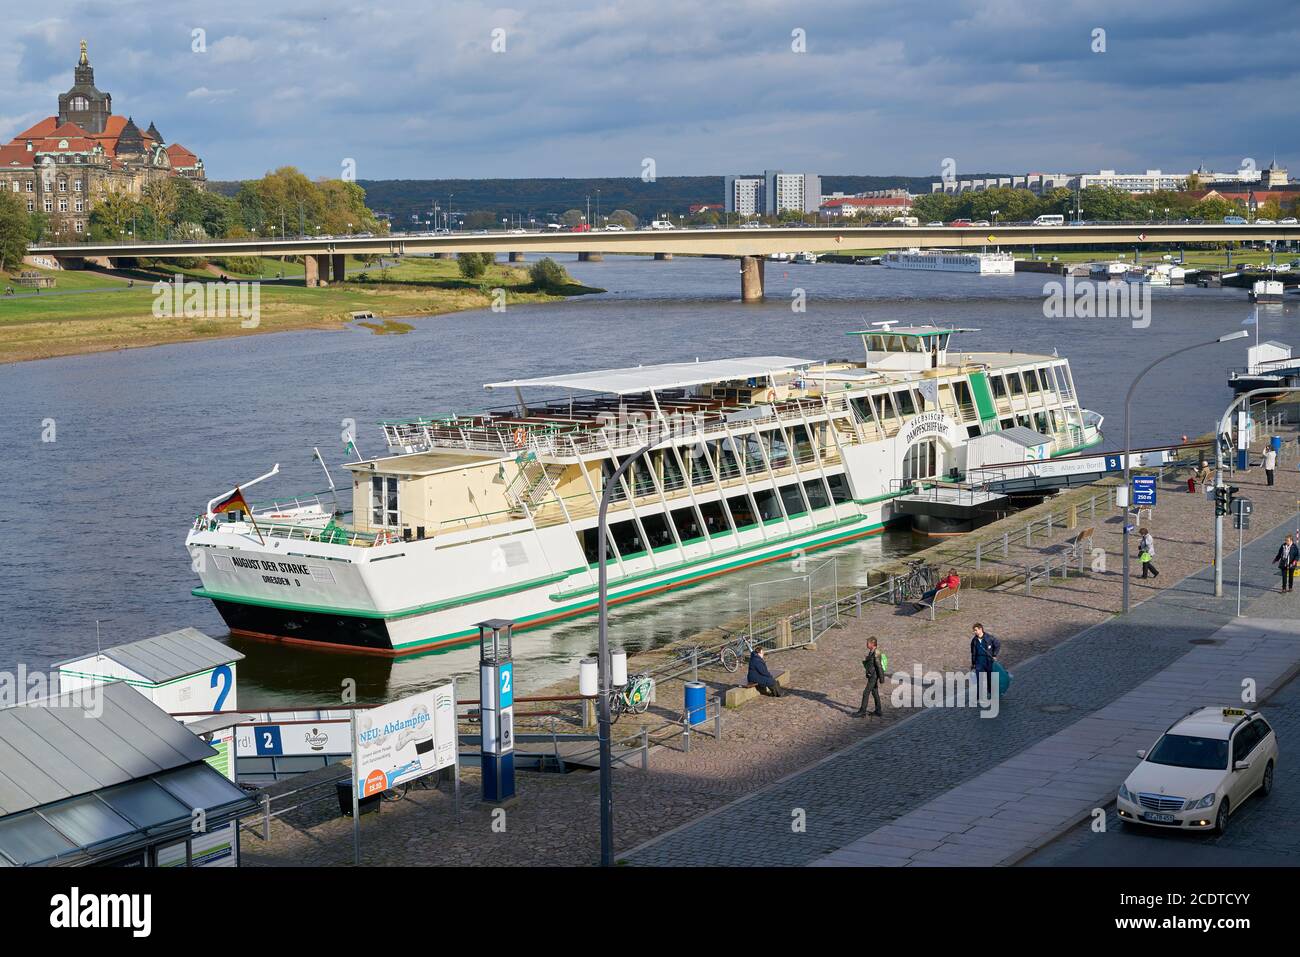 Excursion ship in the harbor of the city of Dresden on the Elbe River Stock Photo